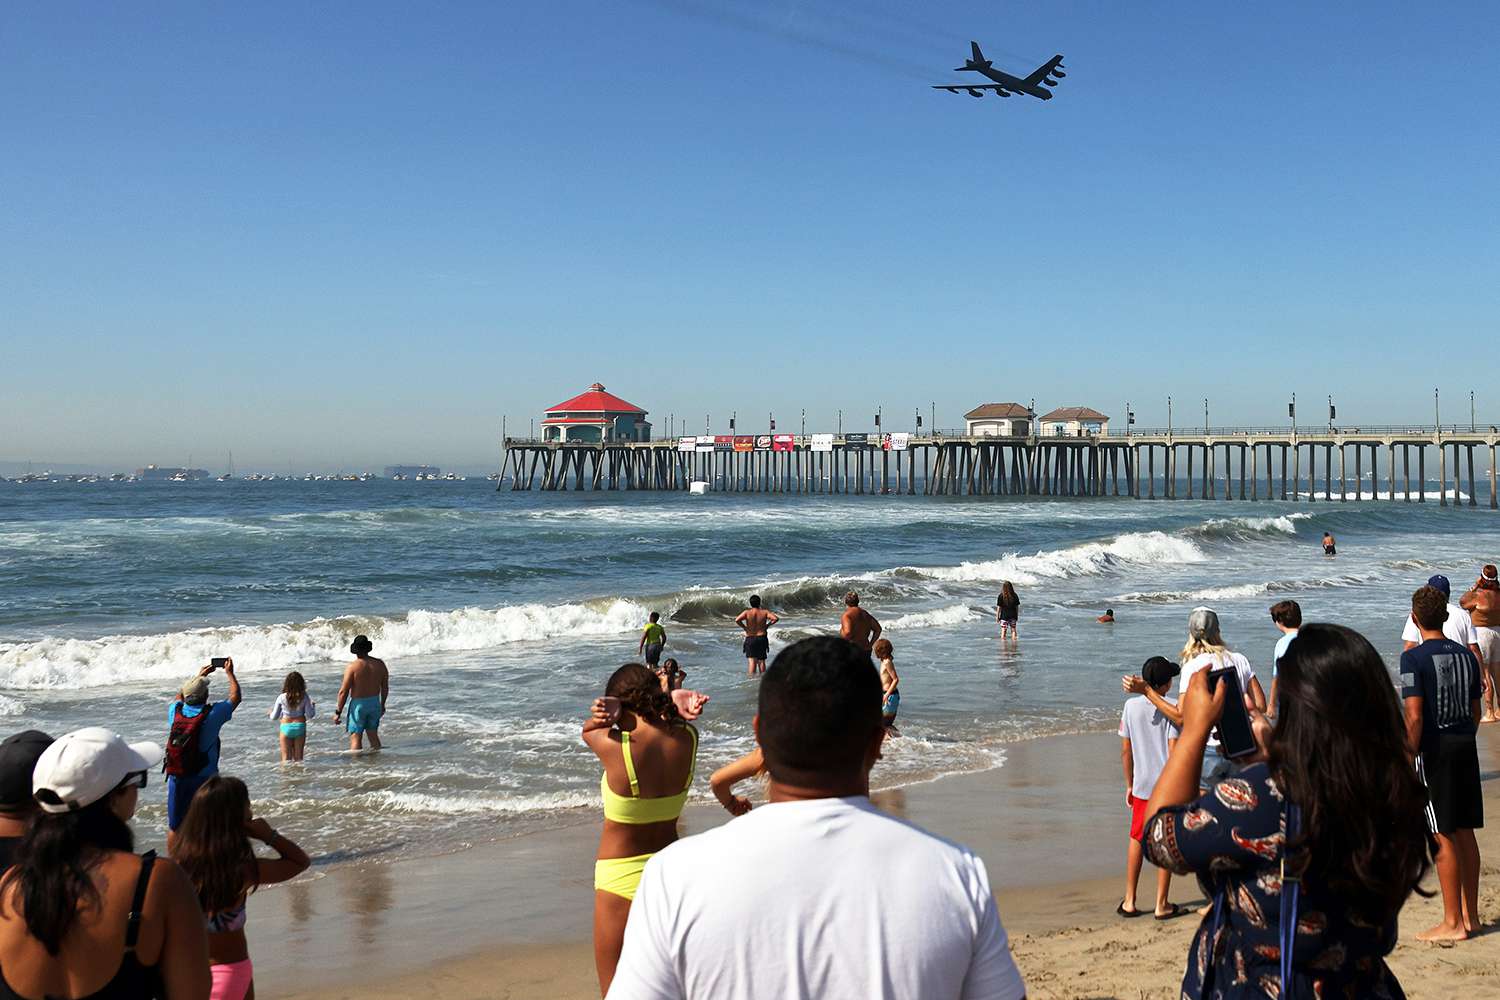 People watch as a Boeing B-52 Stratofortress flies over the Huntington Beach Pier during the Pacific Airshow on October 01, 2021 in Huntington Beach, California.